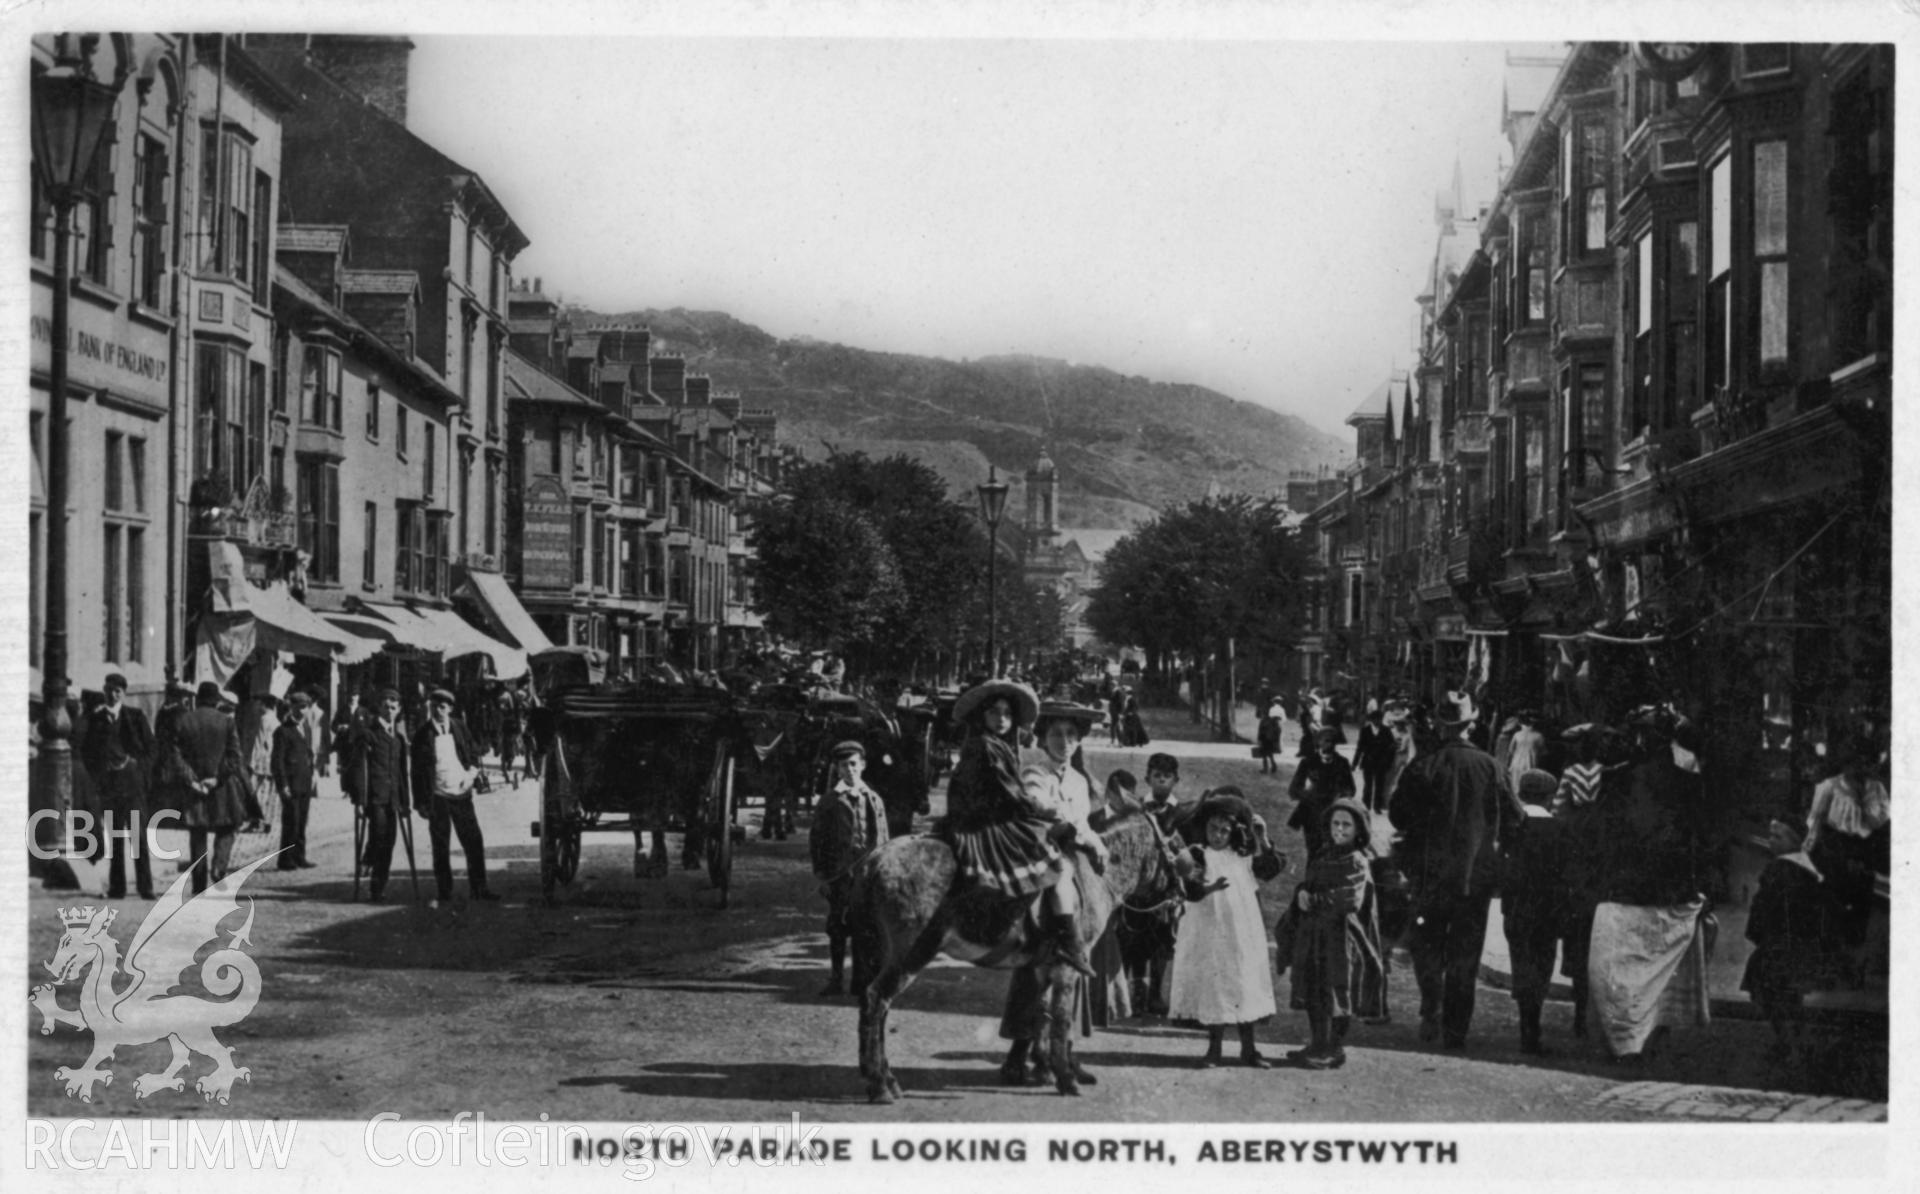 Digital copy of postcard showing North Parade, Aberystwyth, looking North, dated early 20th c. (publisher: J & J Gibson).  Loaned for copying by Charlie Downes